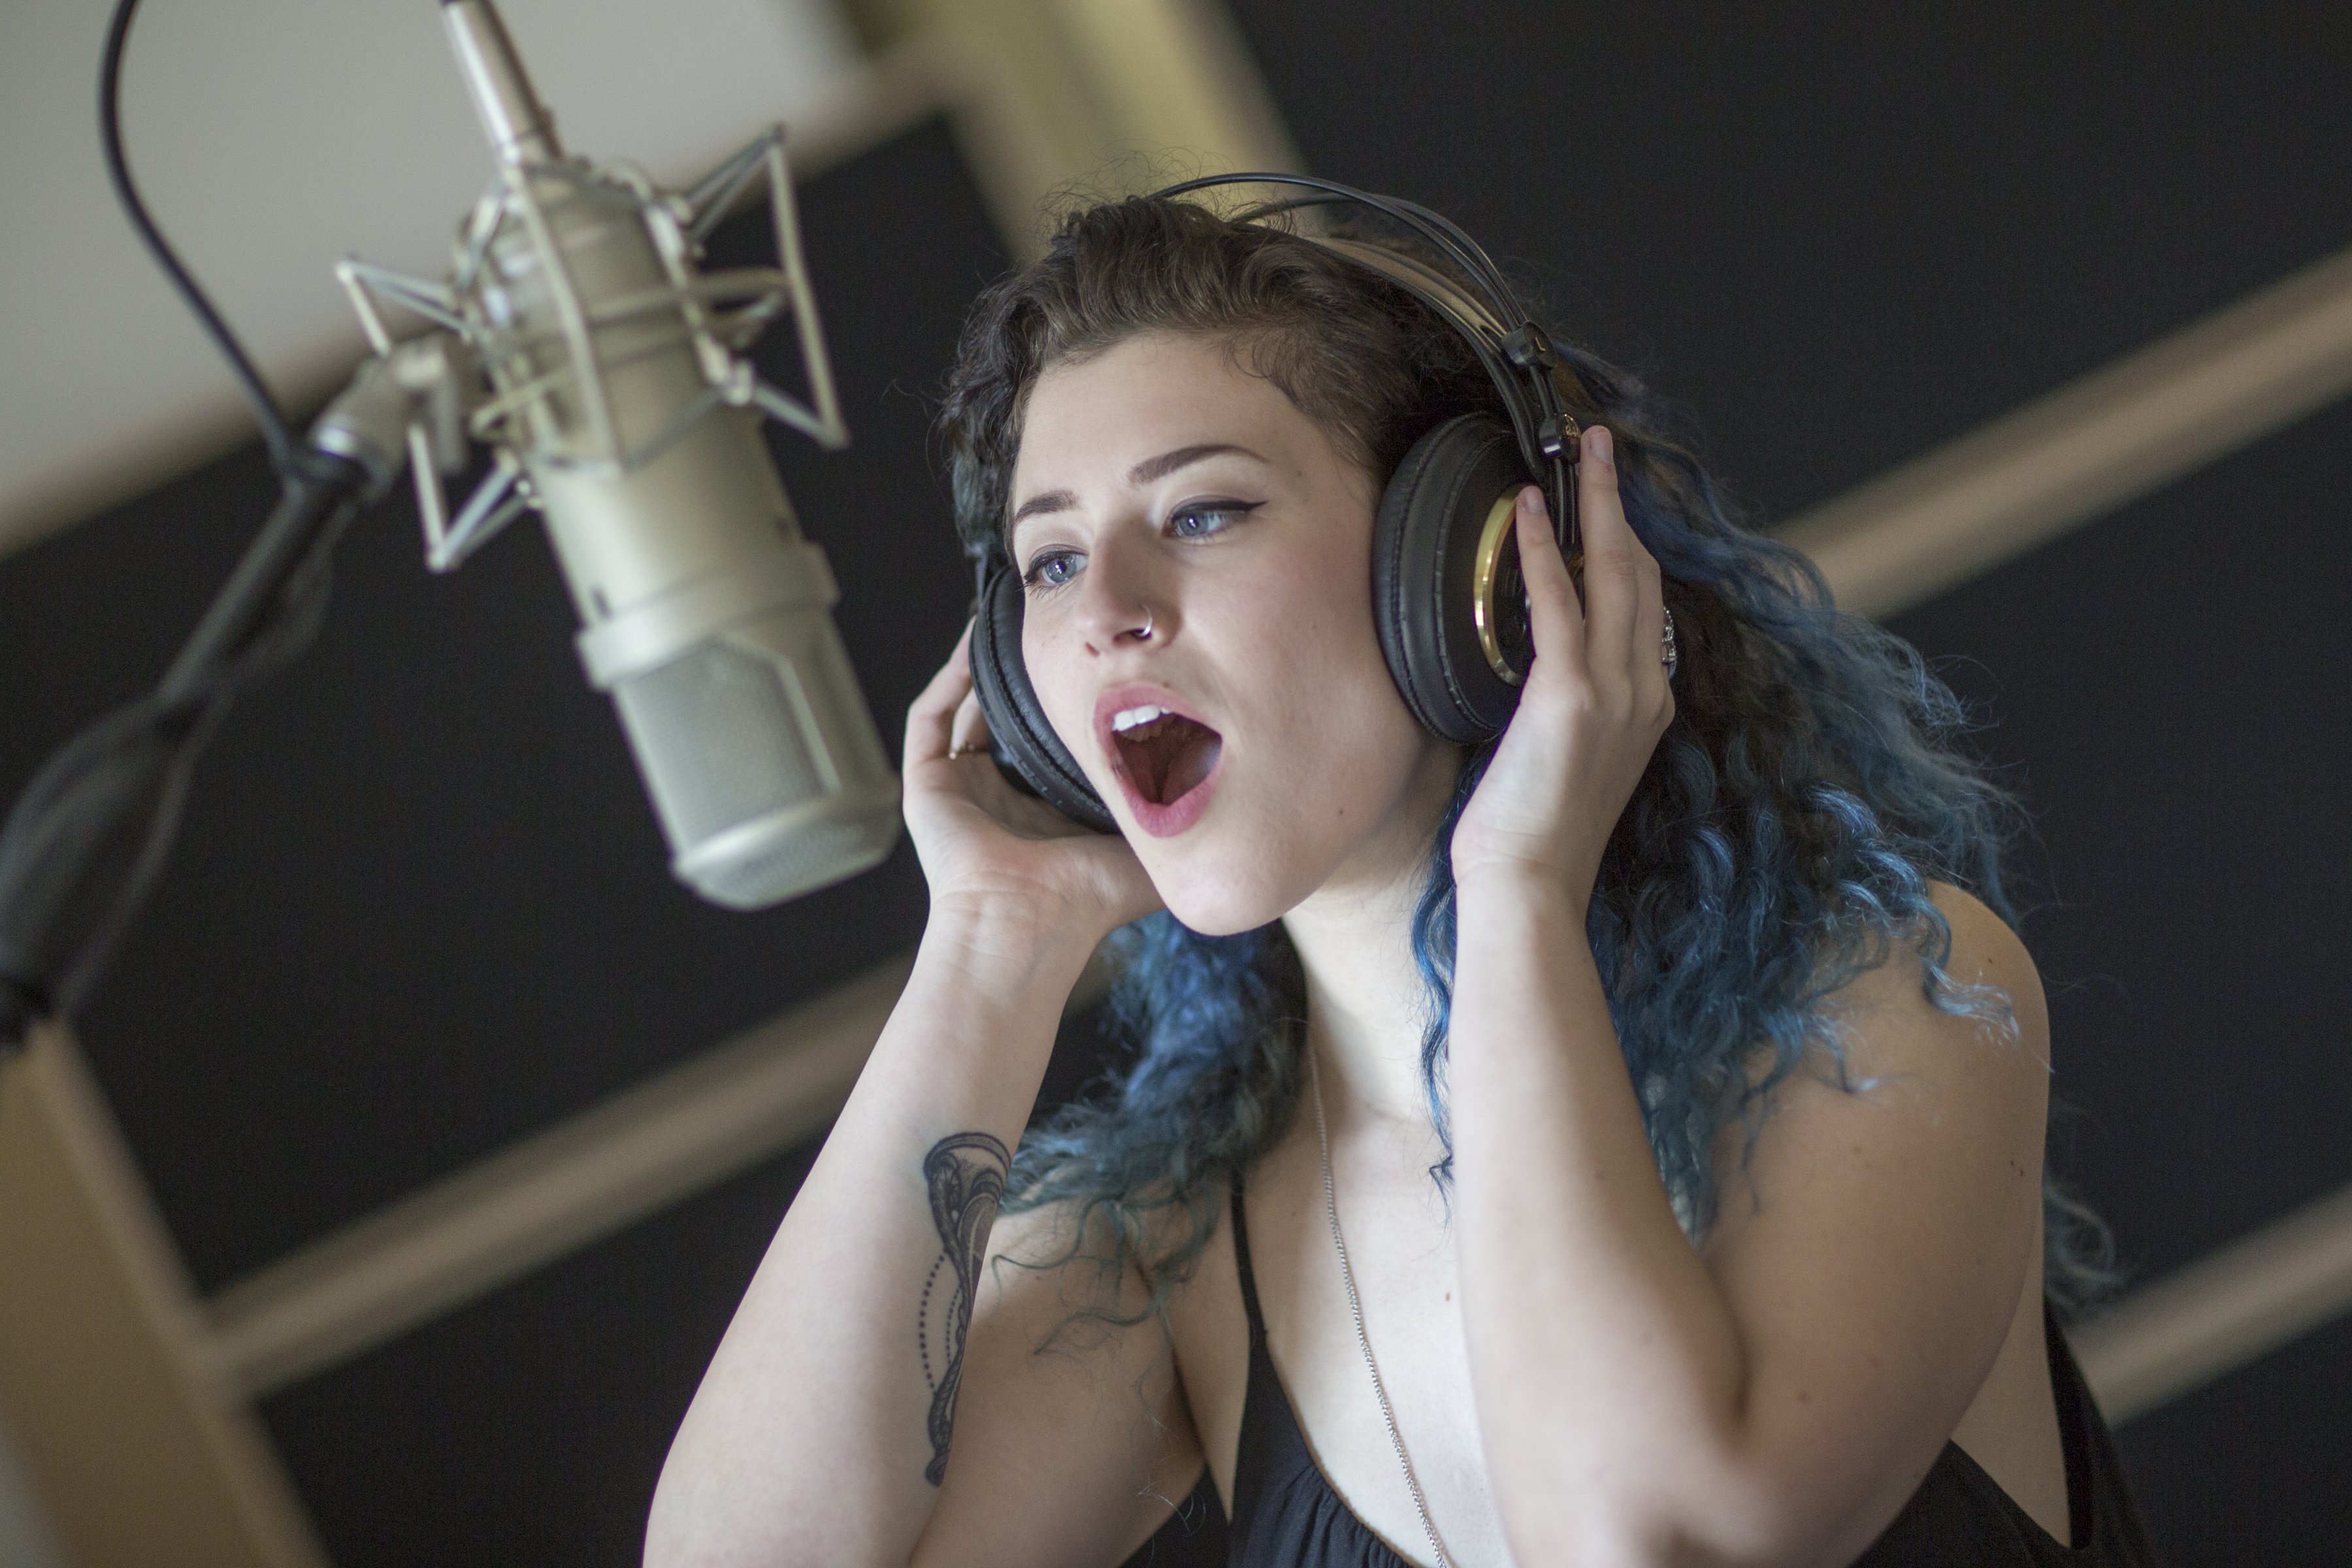 Rowan Music Group recording artist, sof, singing in the studio with headphones and mic